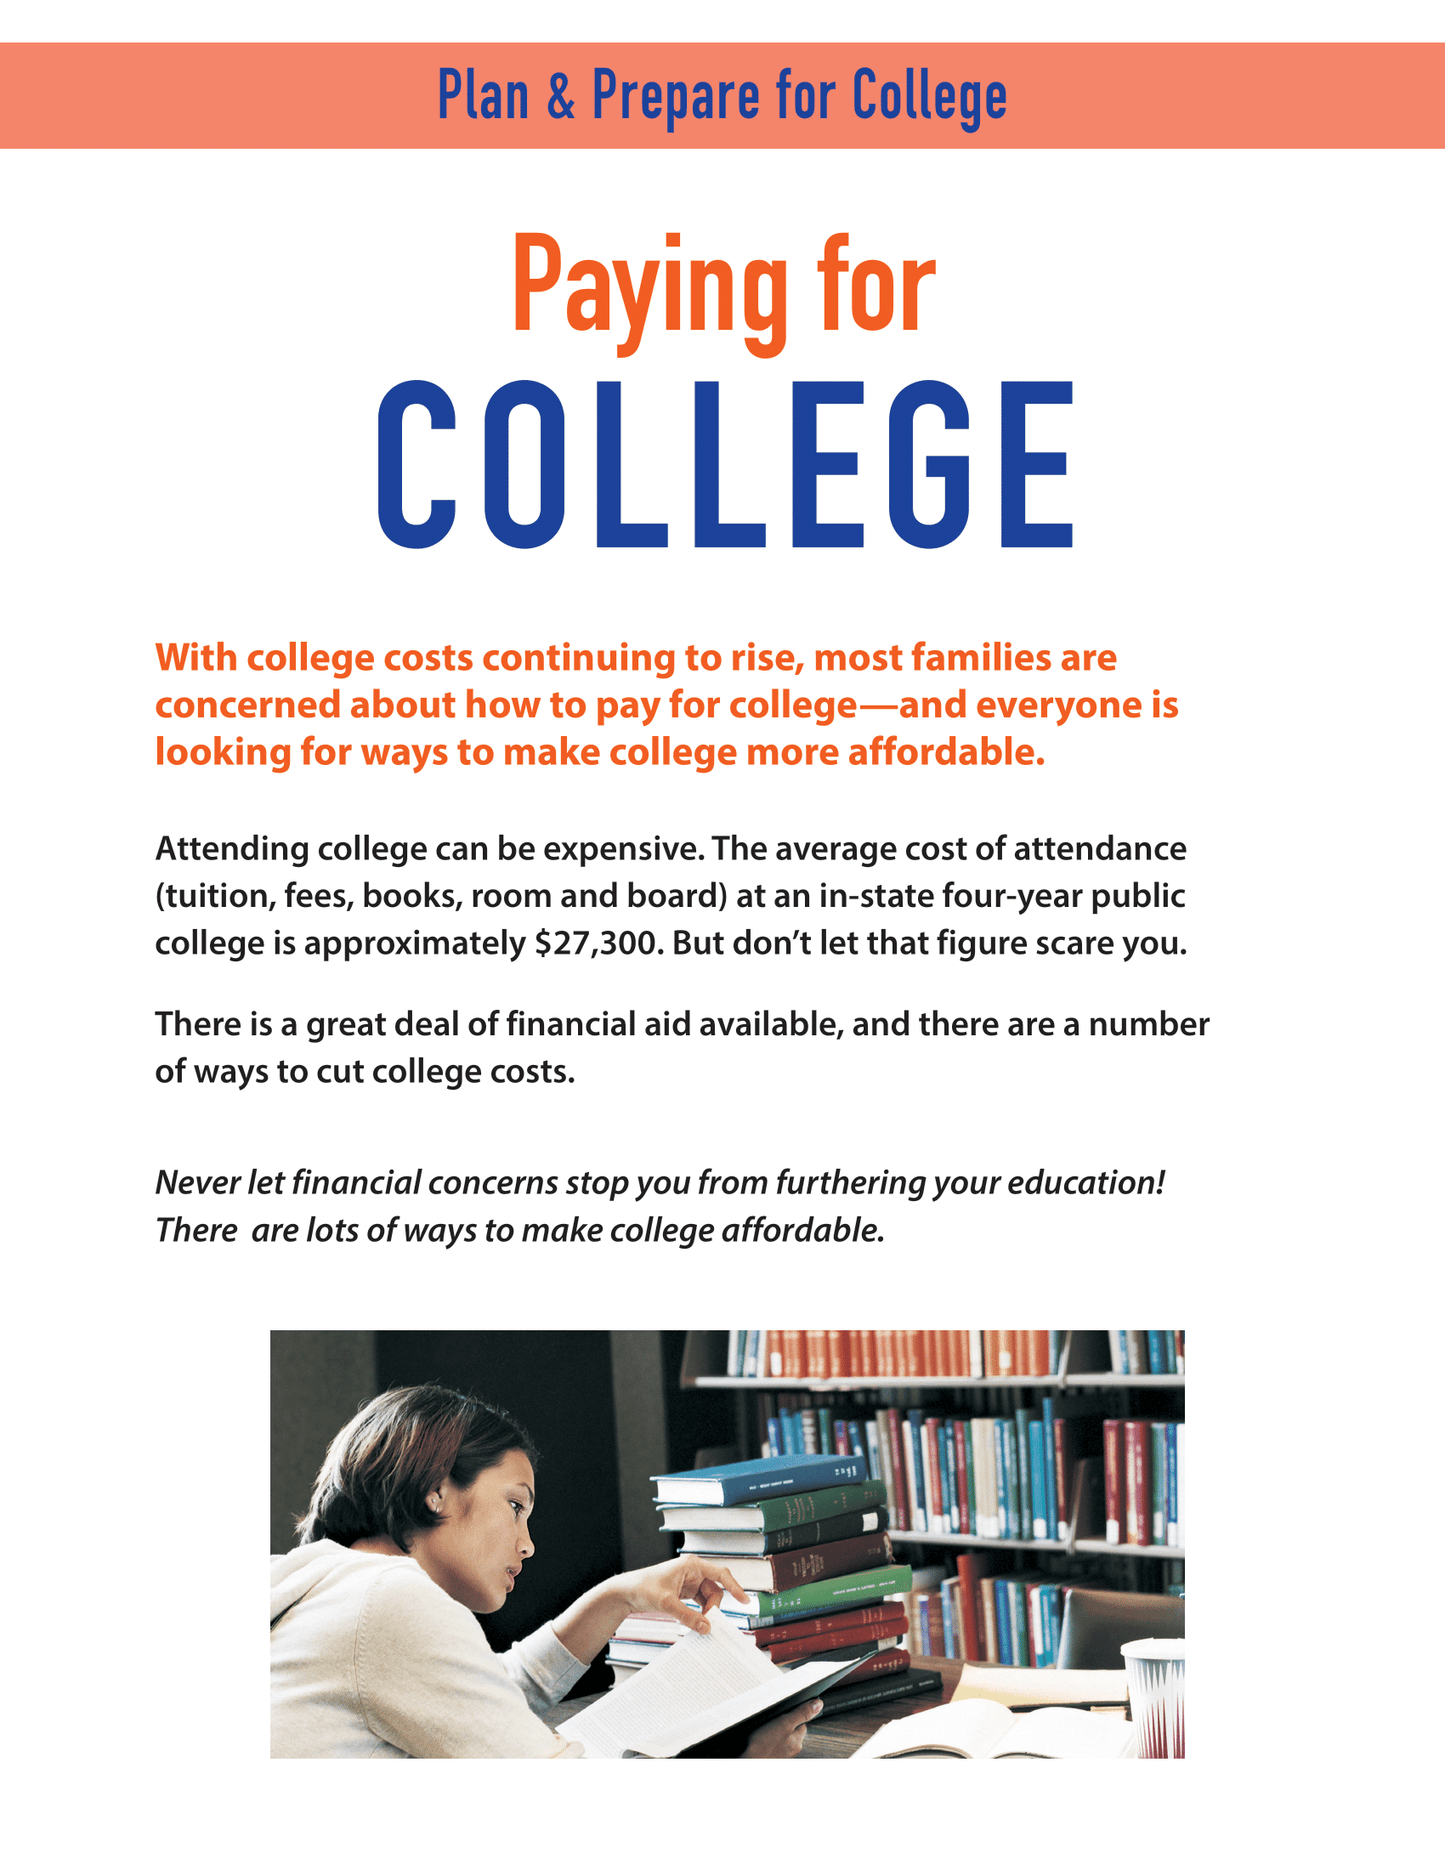 Plan and Prepare for College - Paying for College